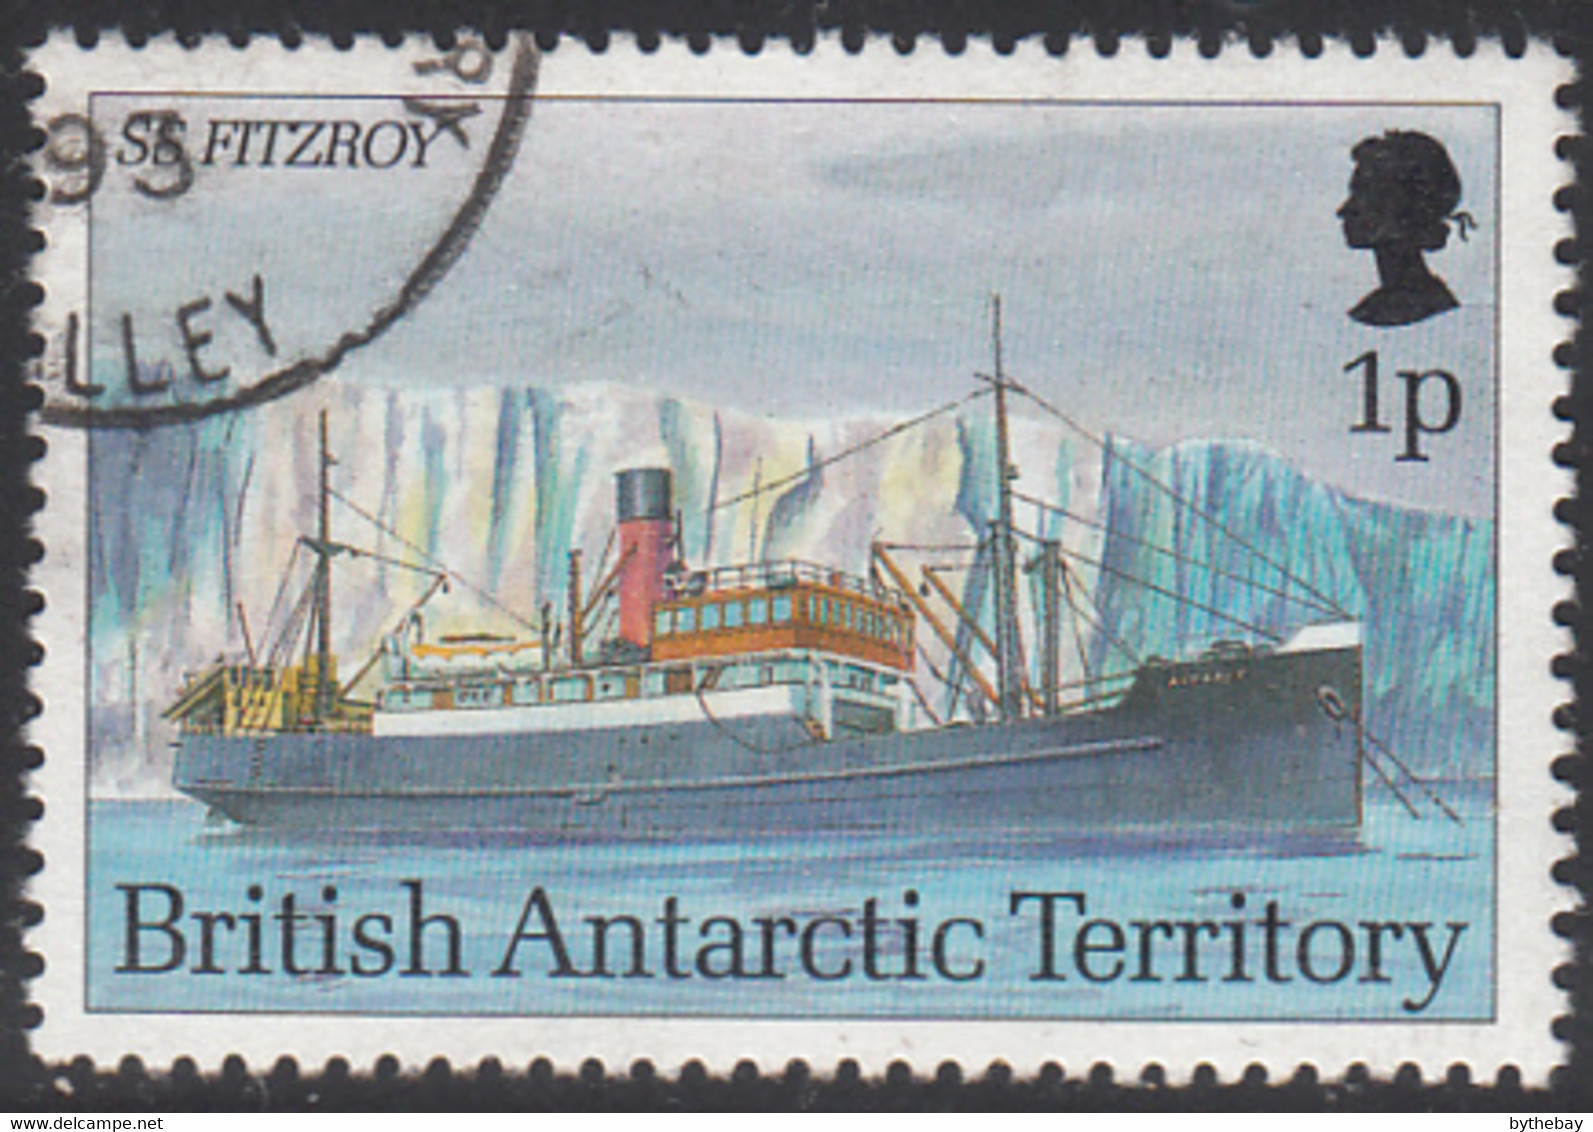 British Antarctic Territory 1993 Used Sc #202 1p SS Fitzroy Research Ships - Used Stamps